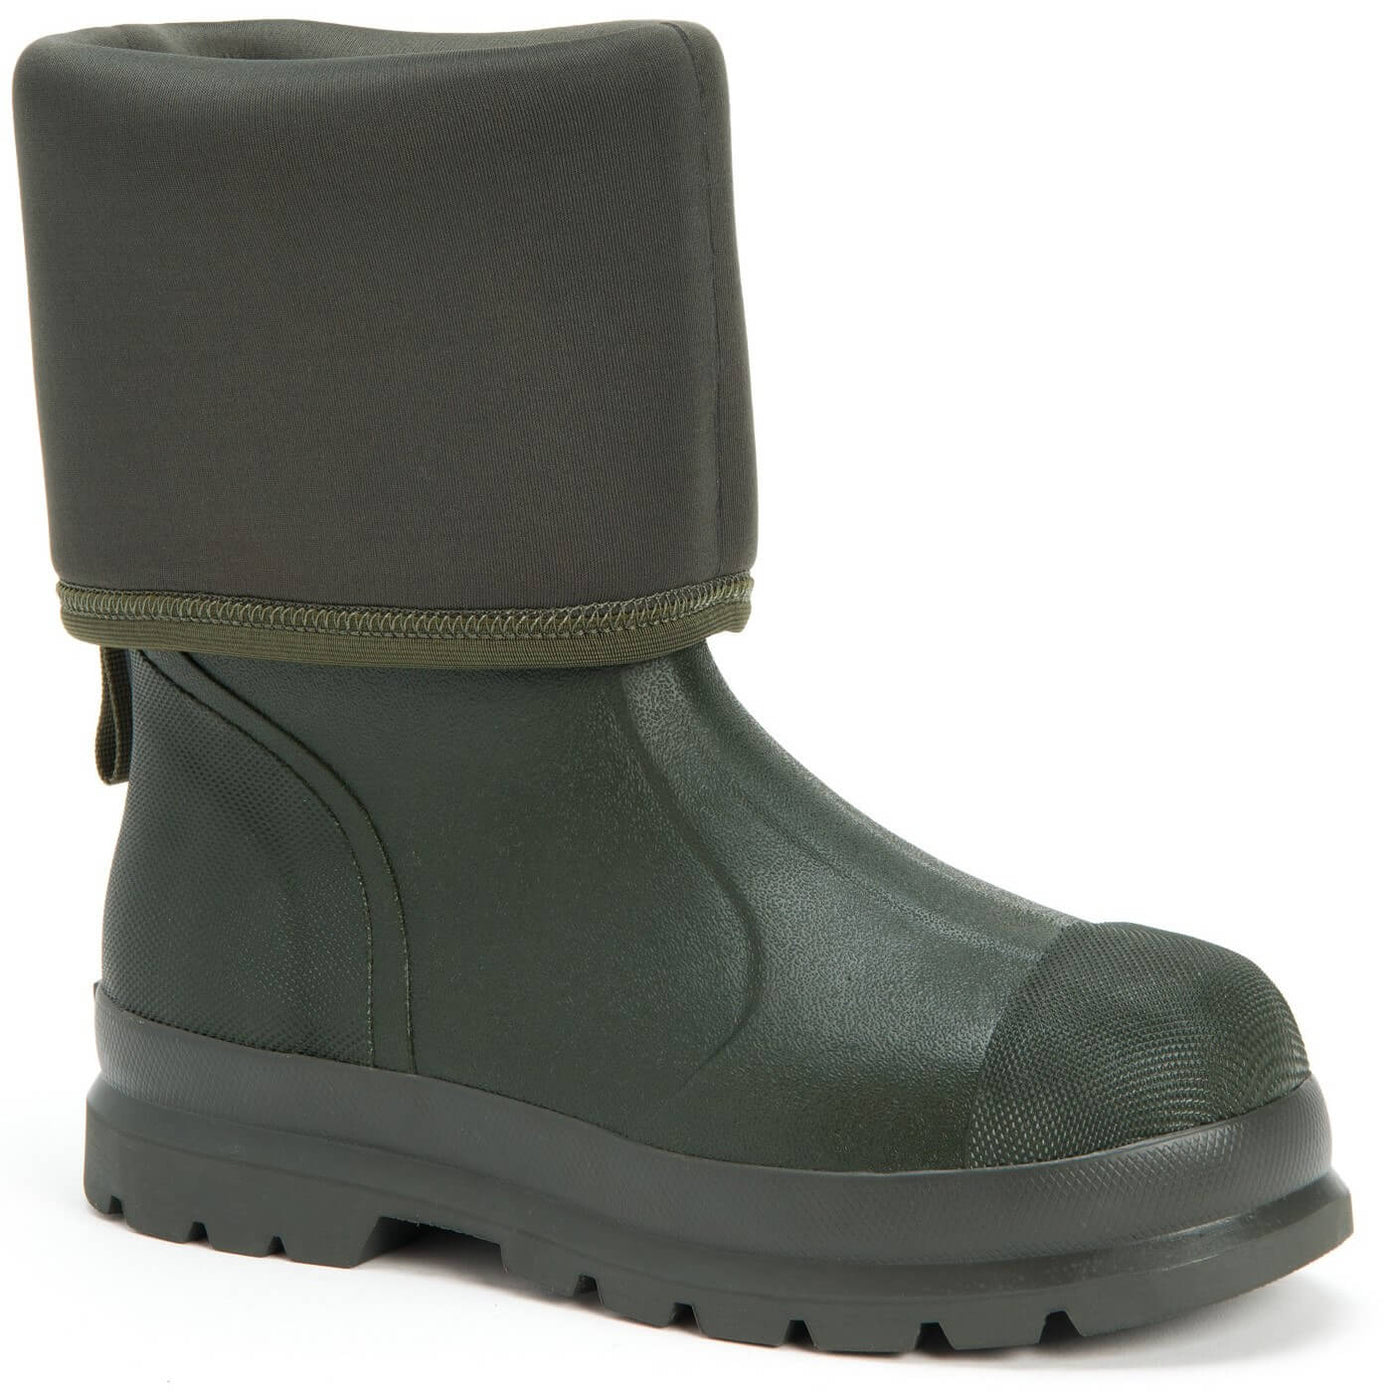 Muck Boots Chore Classic Hi Patterned Wellies Moss 5#colour_moss-army-green